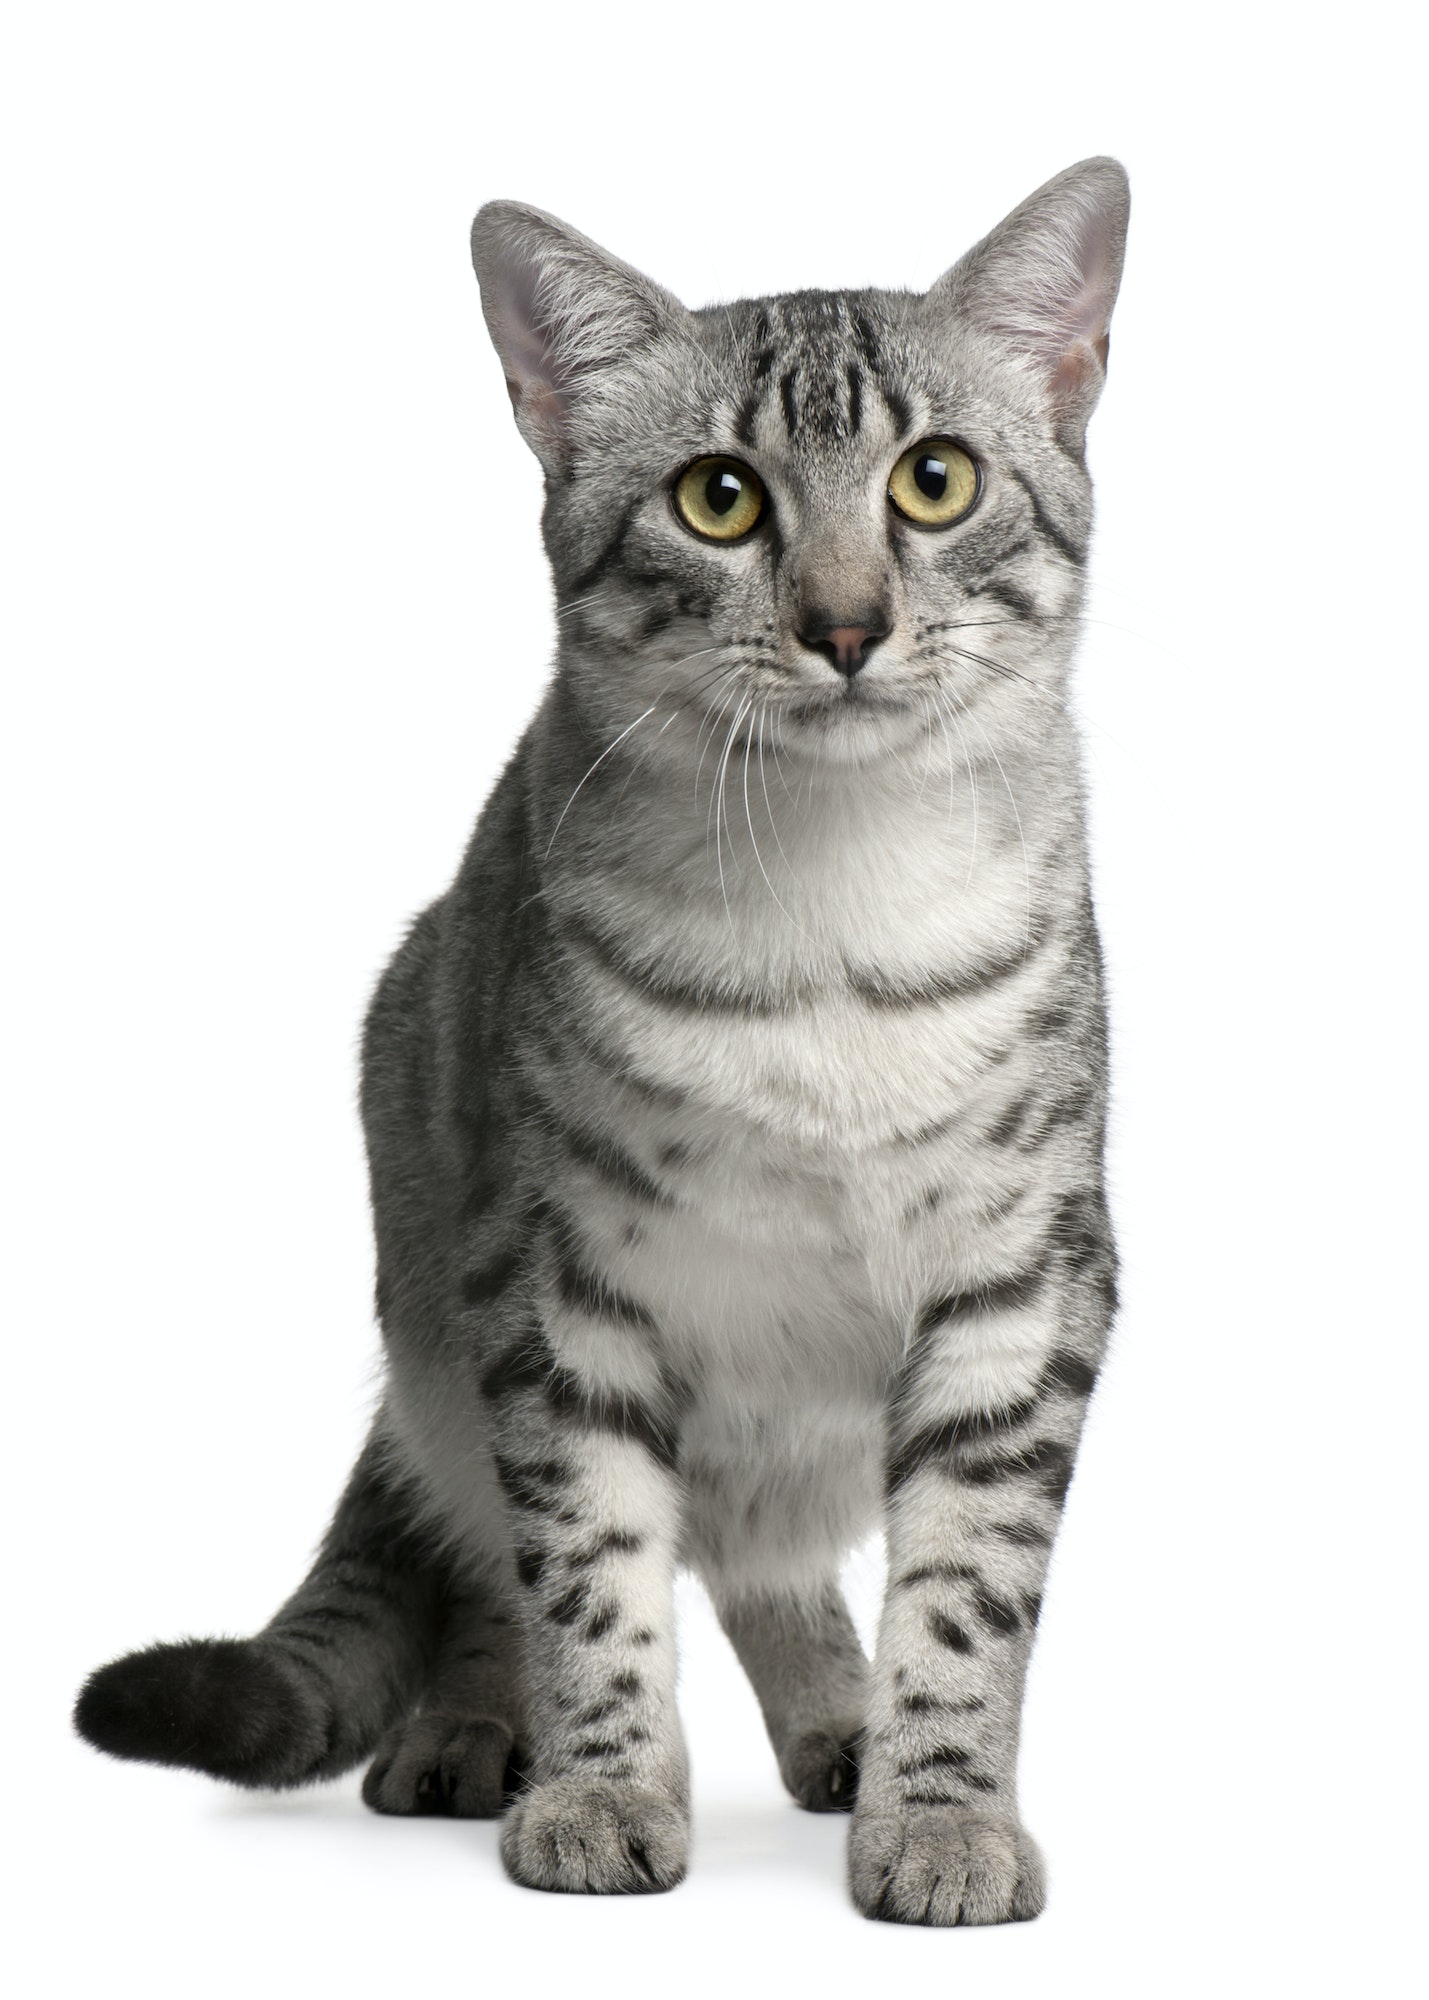 Egyptian Mau Cat, 7 months old, sitting in front of white background